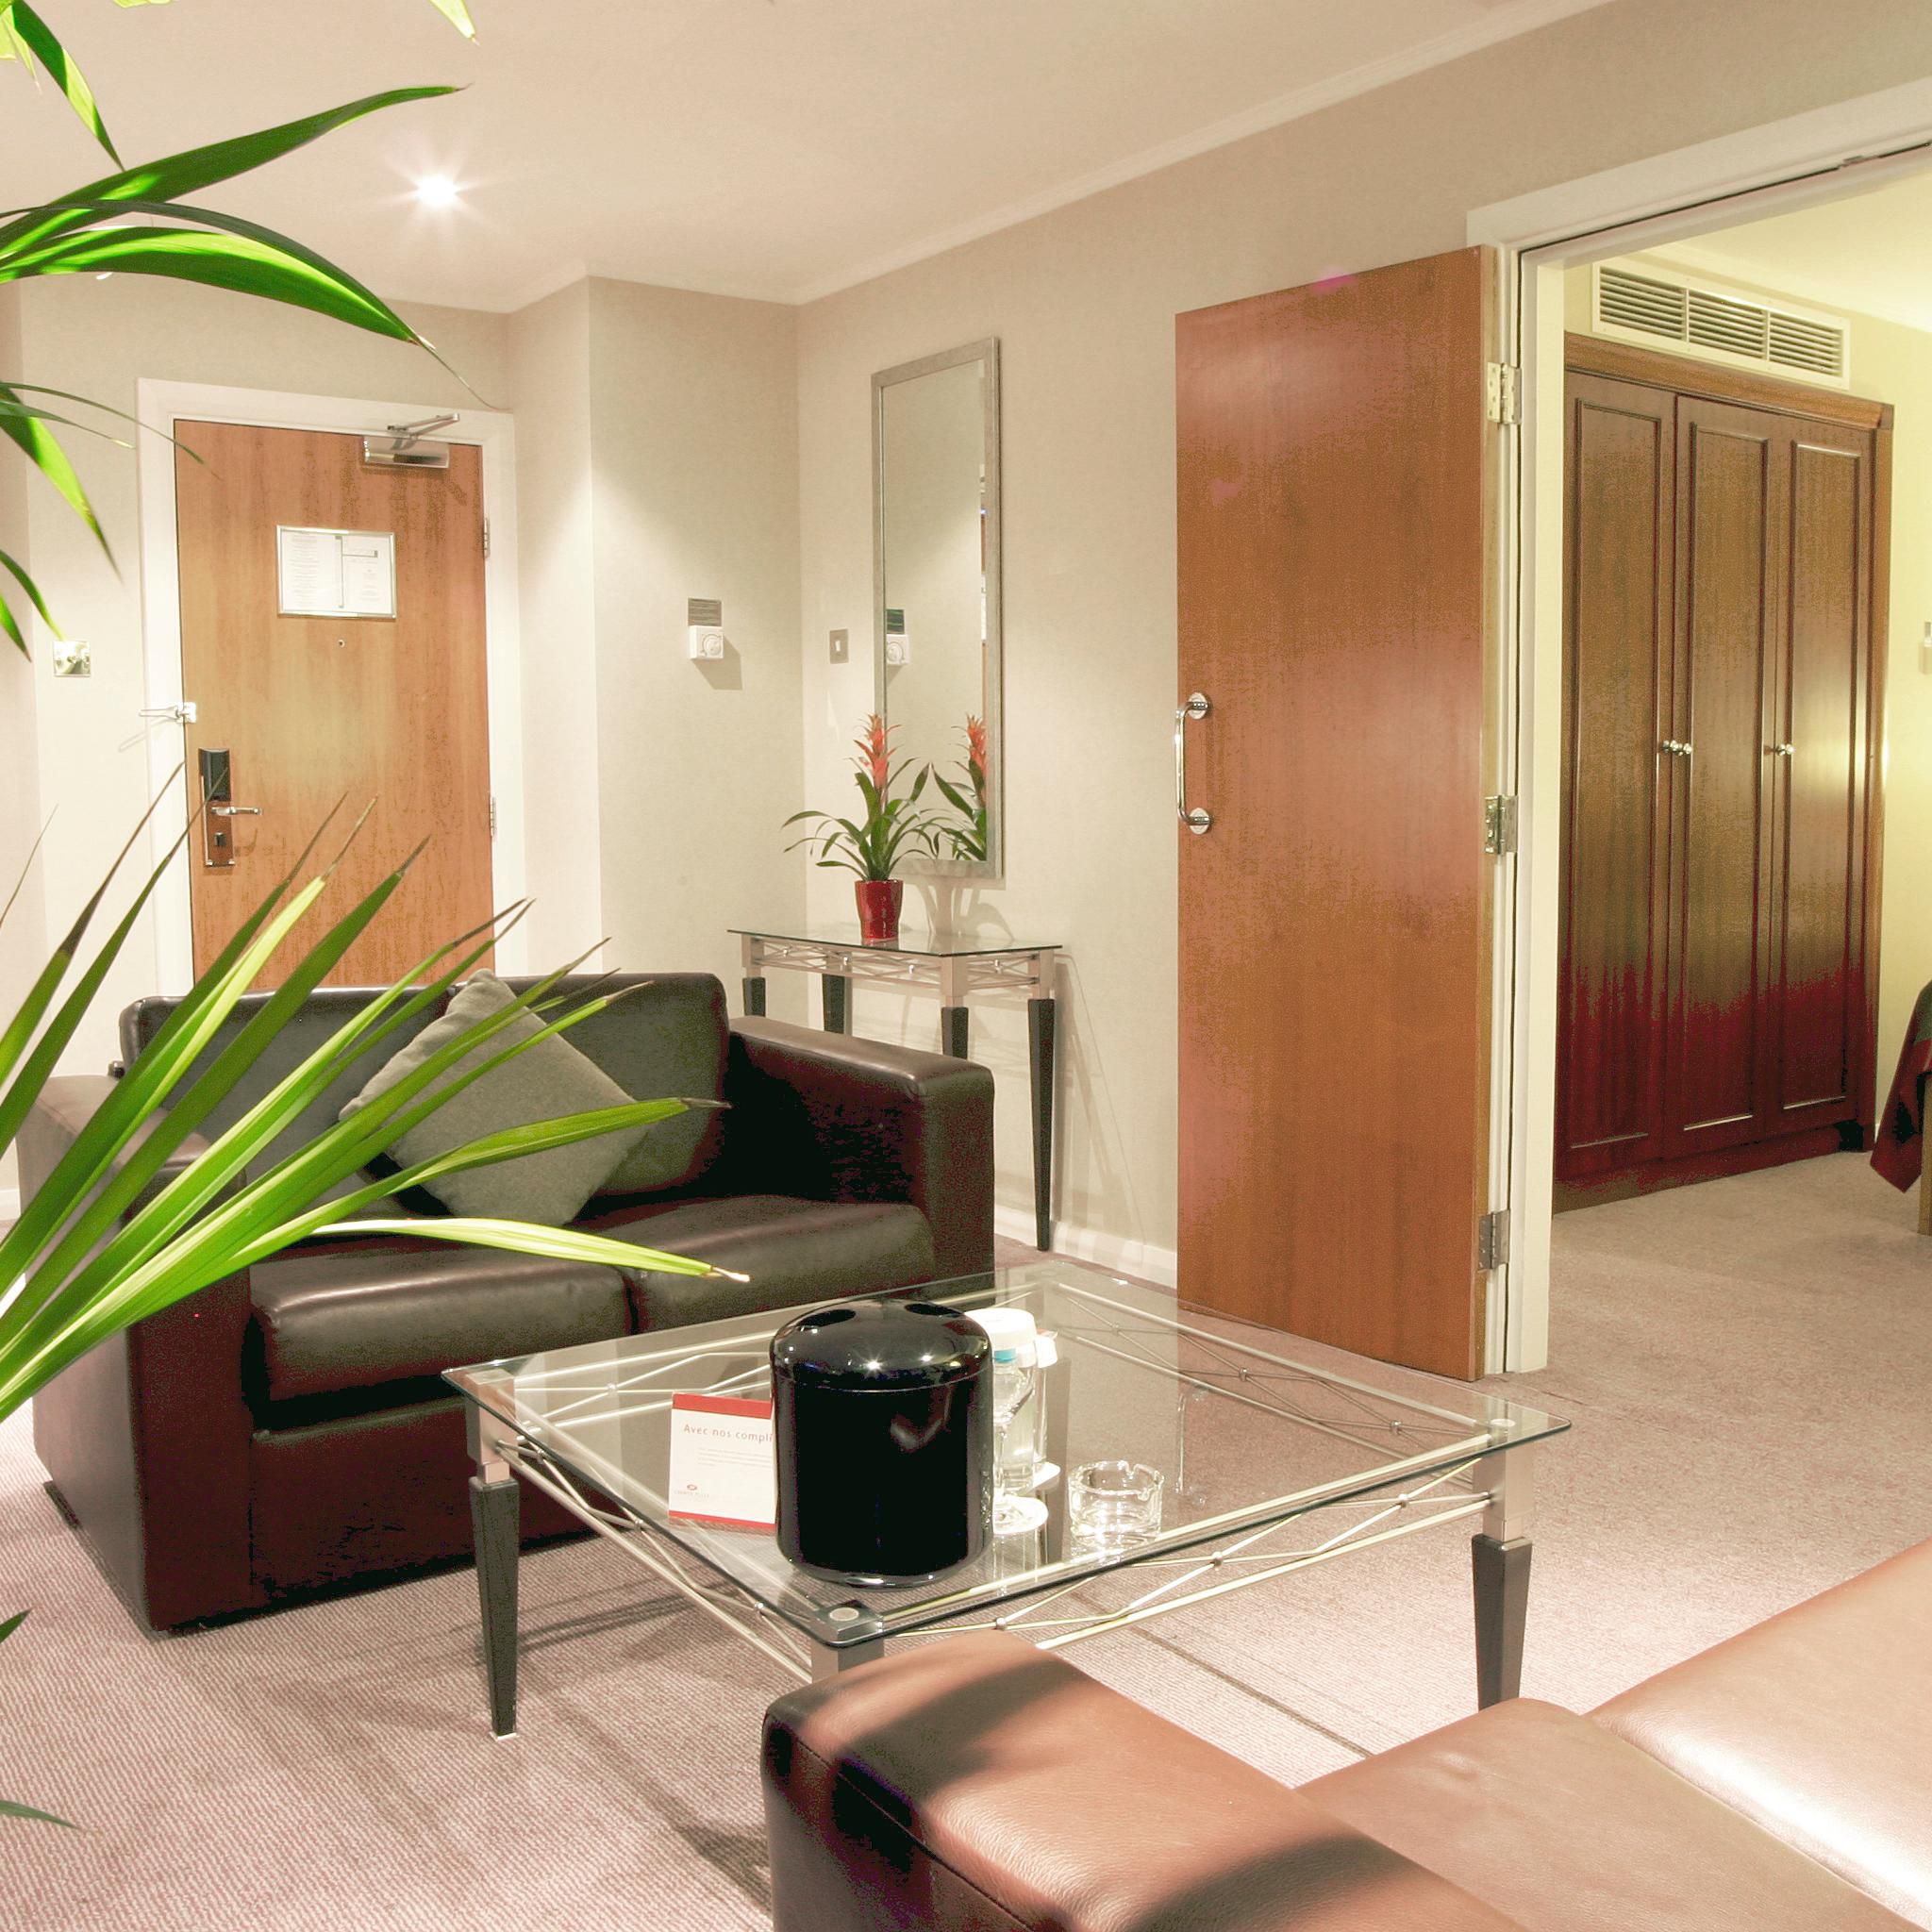 Treat yourself to the luxury of a king suite